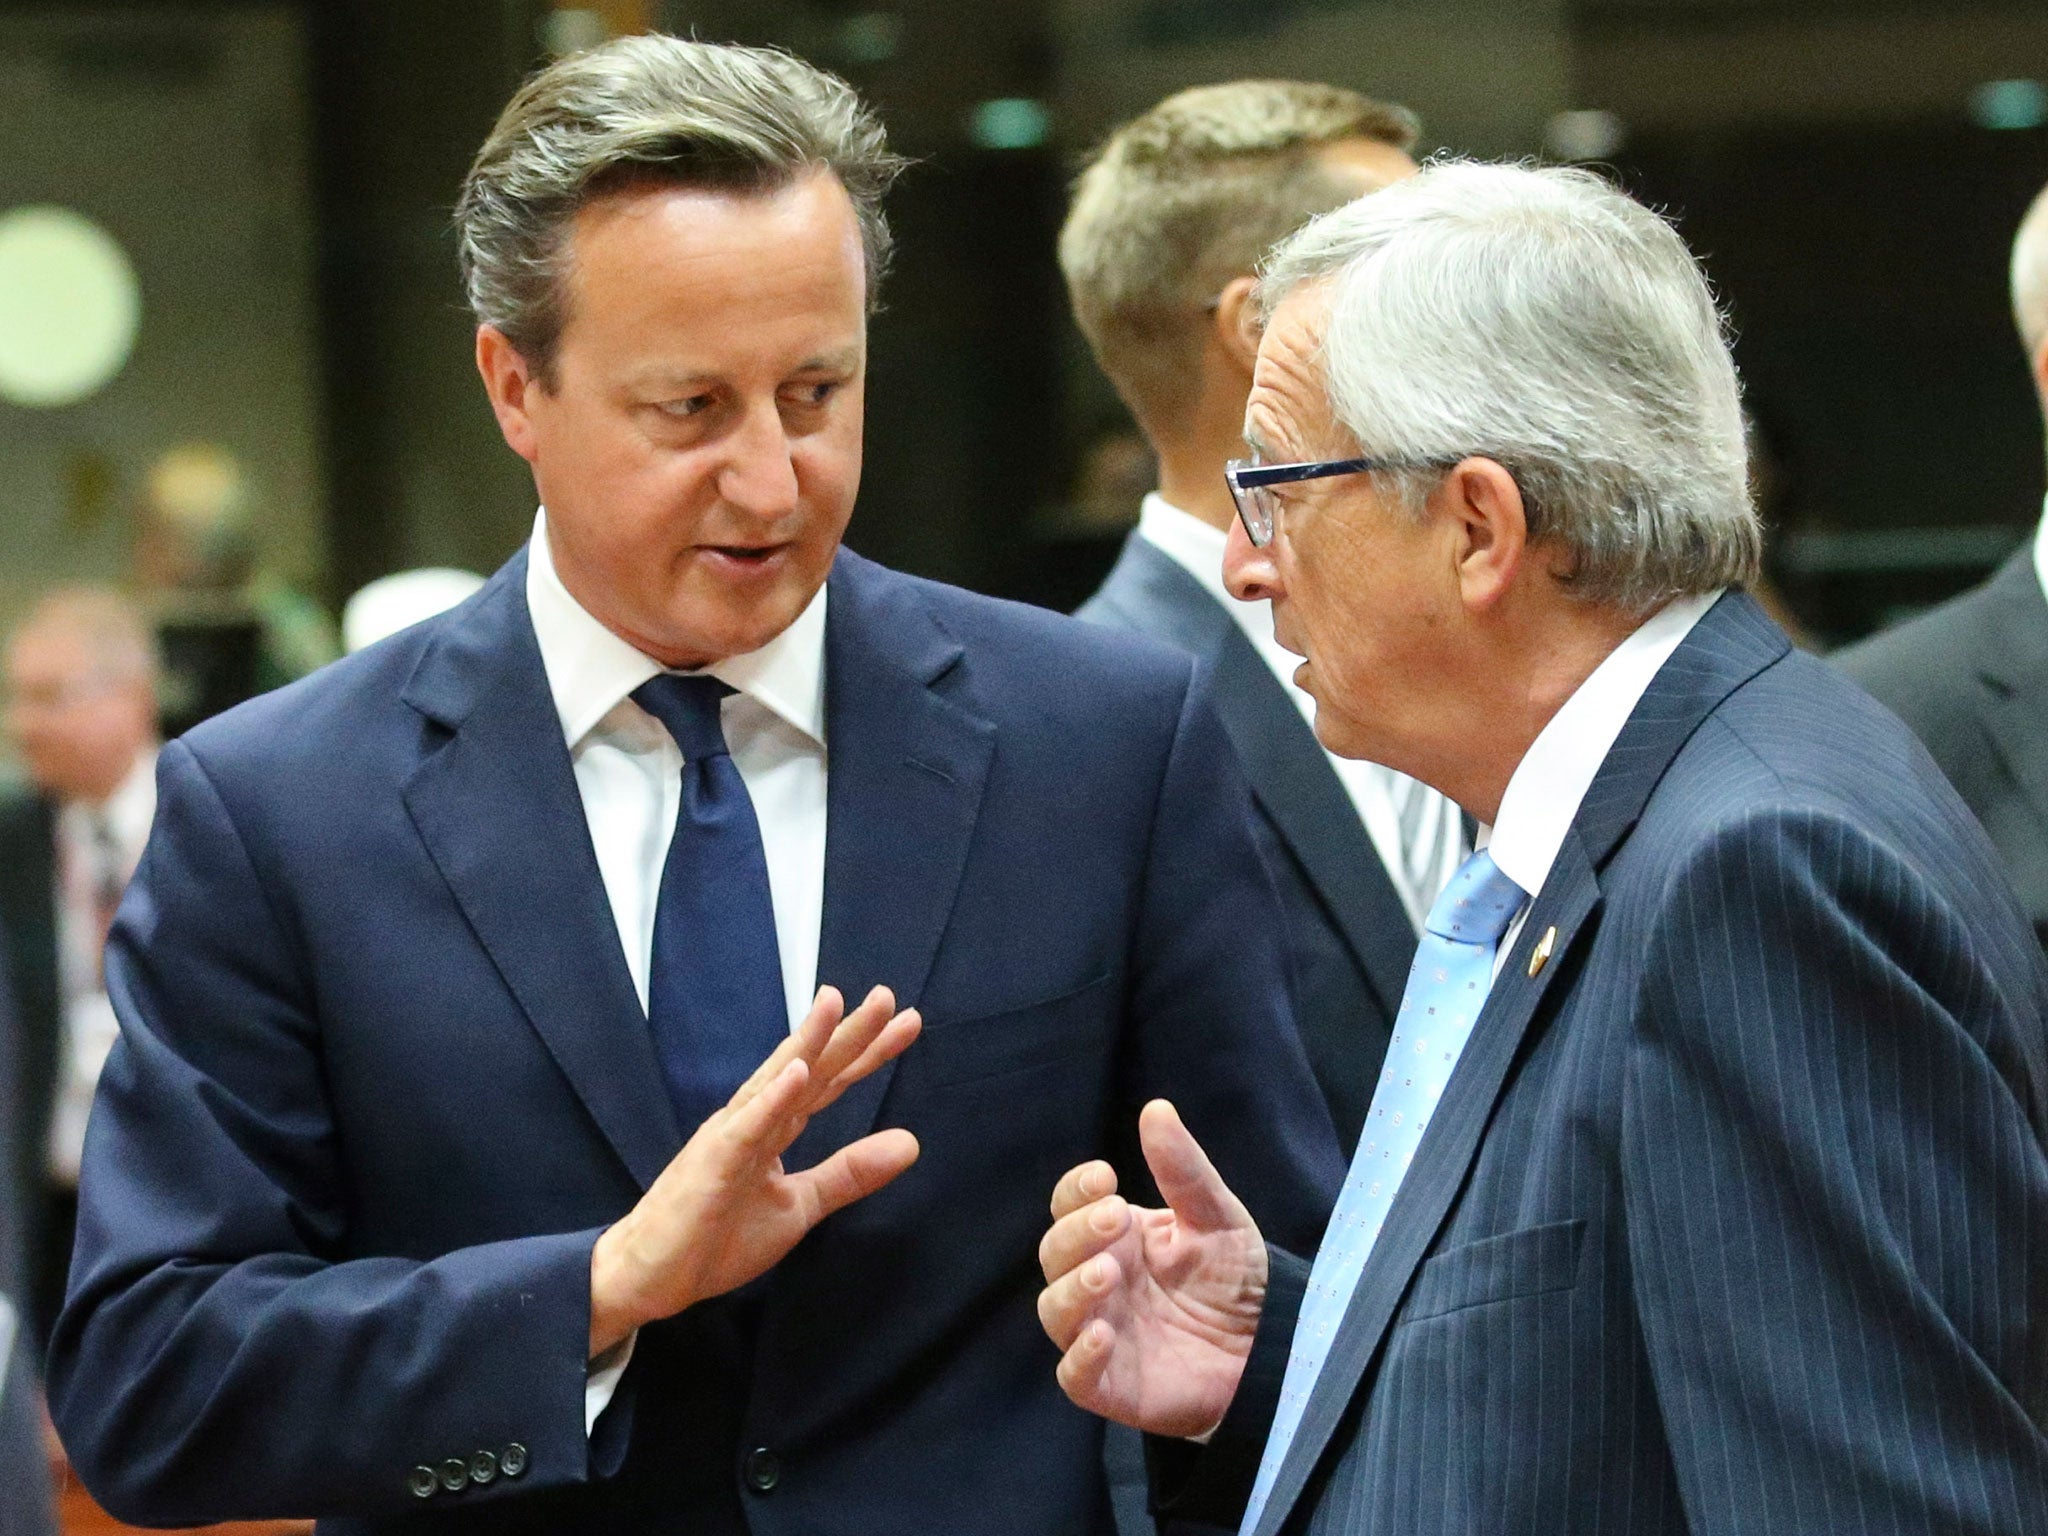 British Prime Minister David Cameron talks with President-elect of the European Commission Jean-Claude Juncker at the start of a Special Meeting of the European Council at EU Council headquarters in Brussels